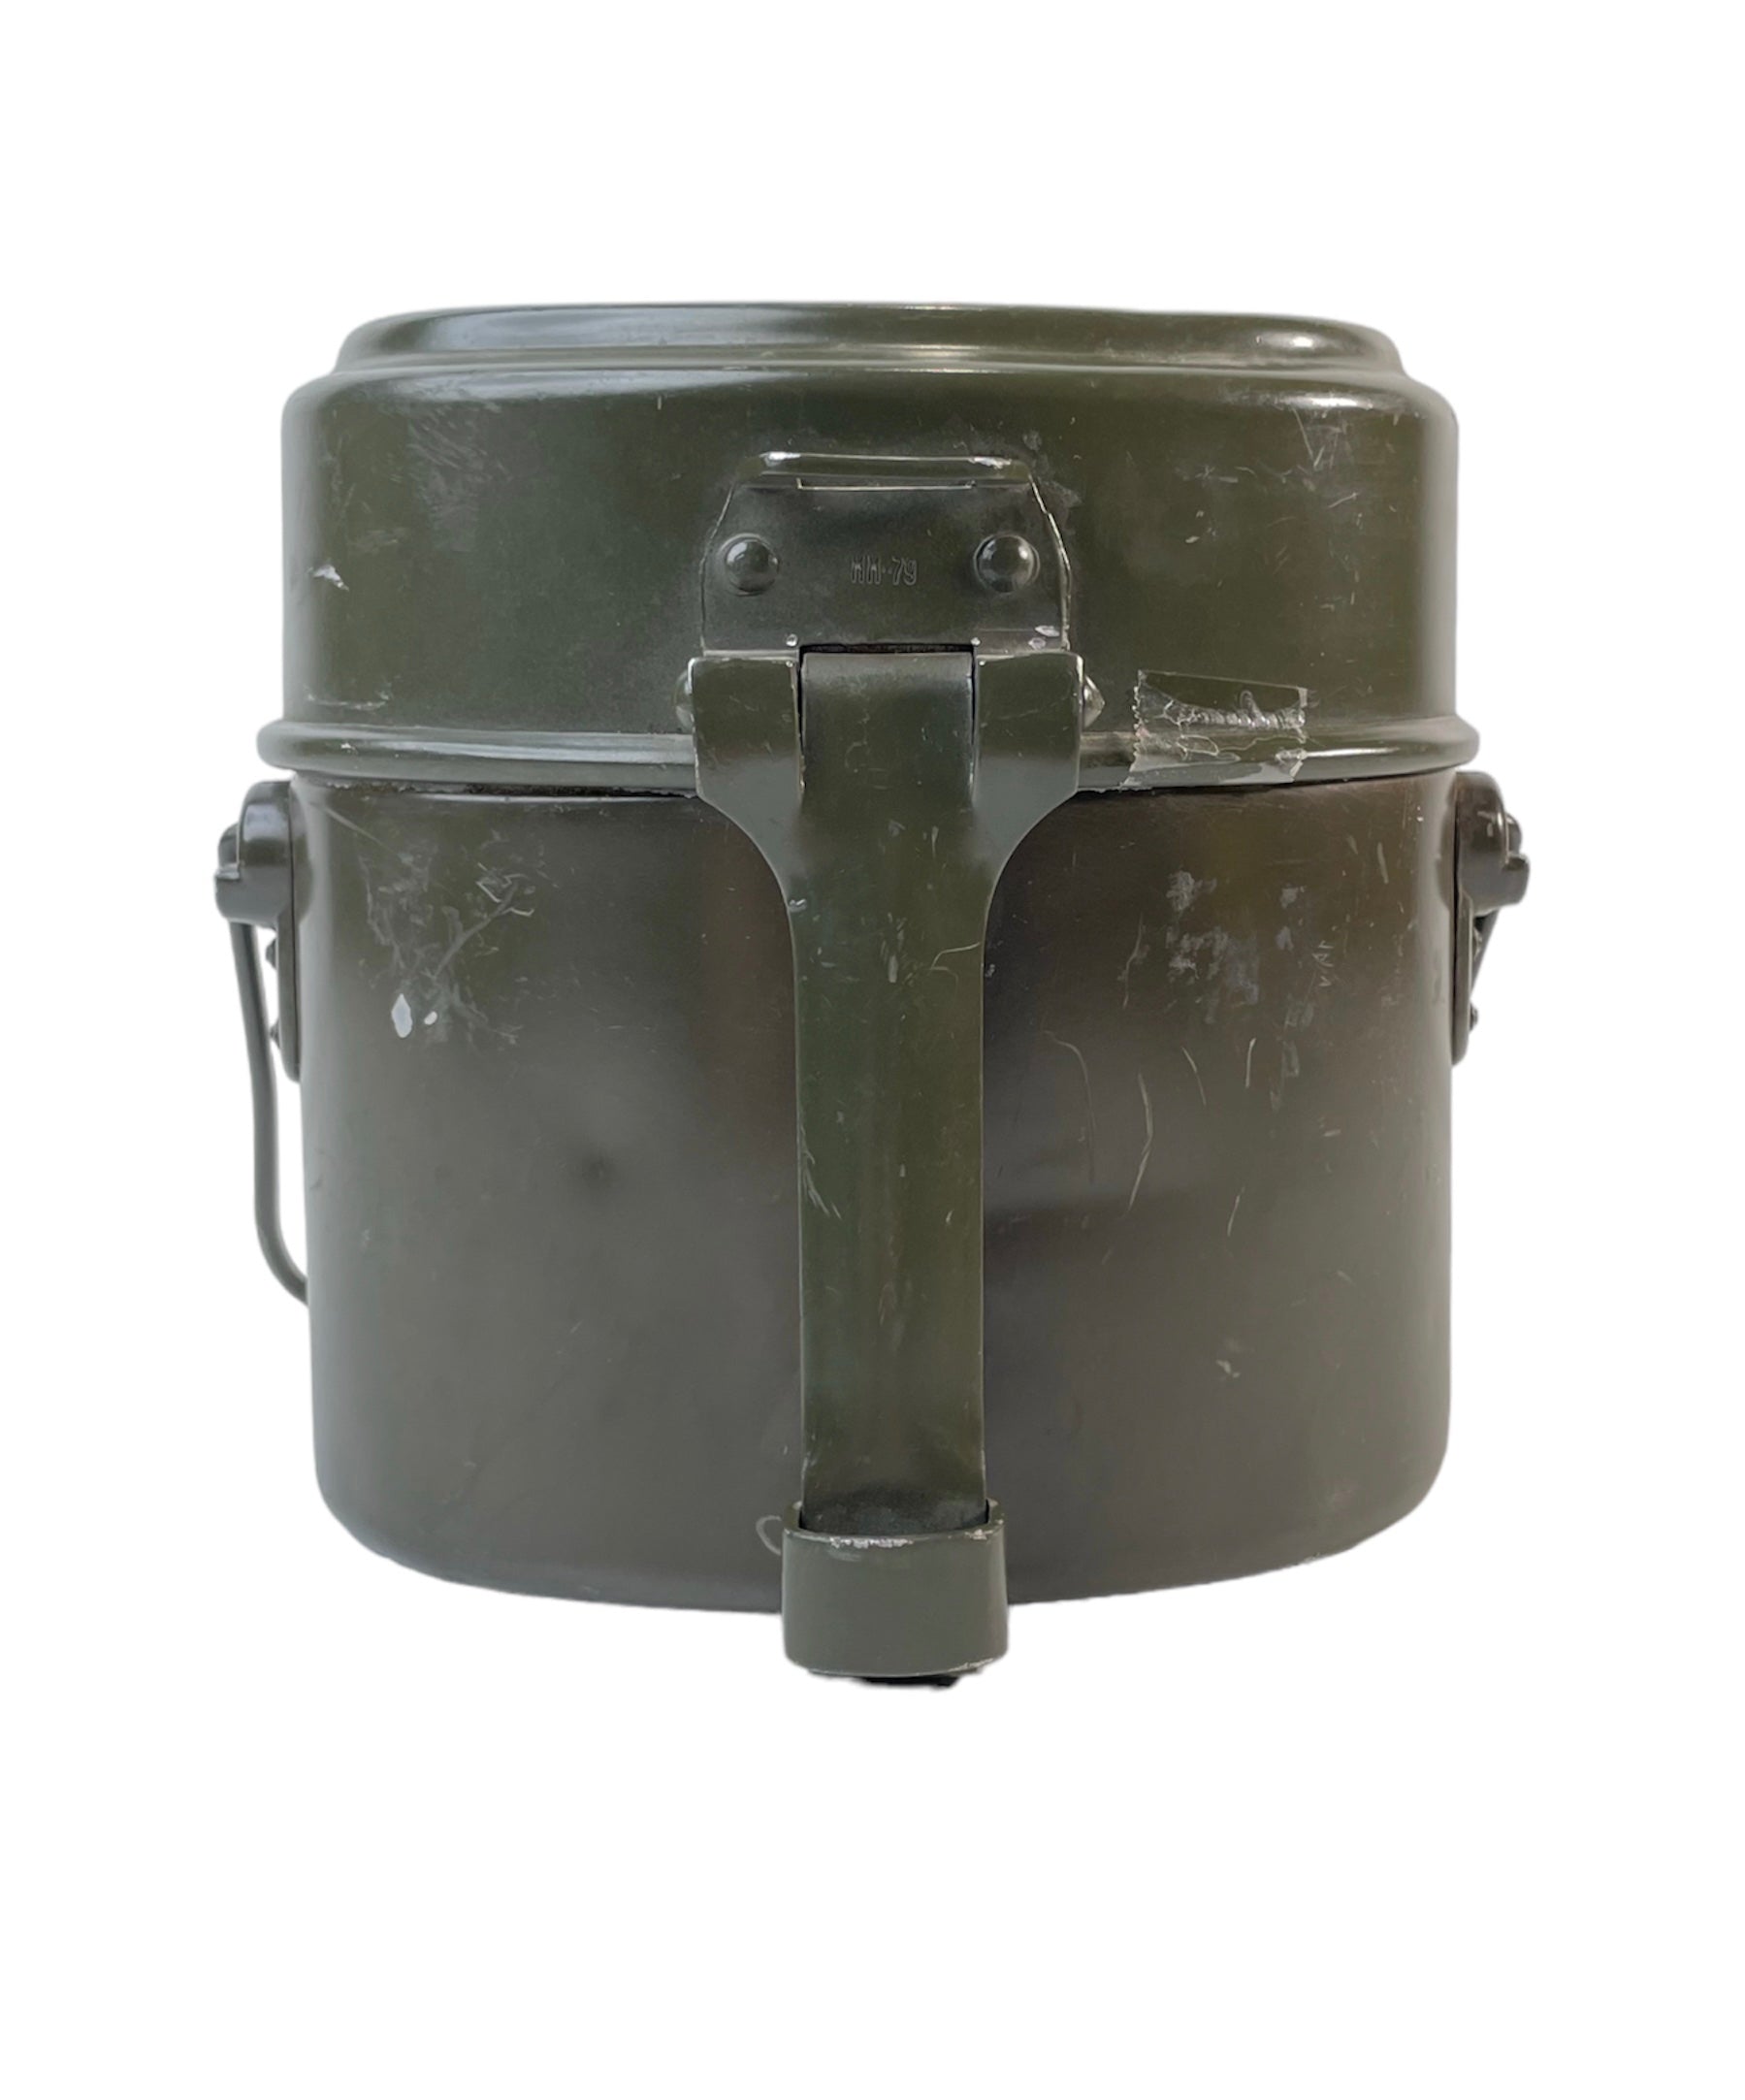 Vintage 1943-1945 Wehrmacht Army End of War Storage Food Container